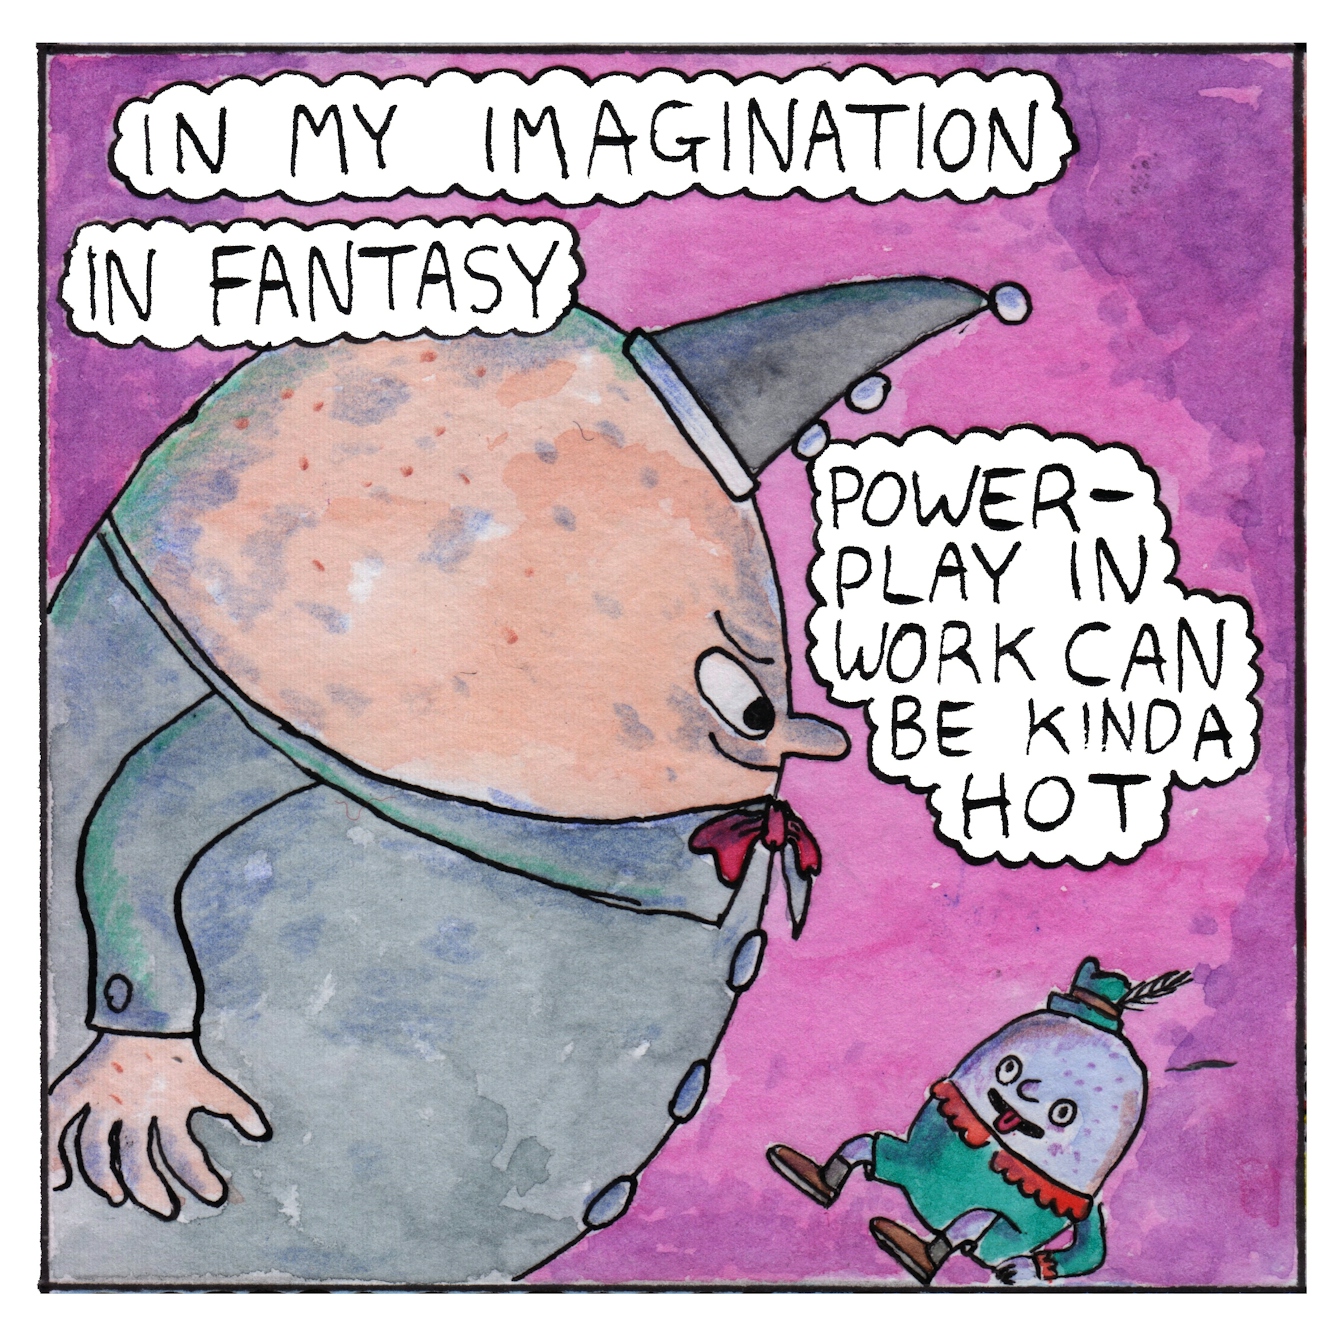 Panel 3 of the comic 'Egg Inc.': A large egg-shaped character in a grey outfit and grey conical hat fills most of the panel and bears down on a small egg-shaped character dressed in green, with a green hat. The smaller character lies back on the floor, propped up on it's arms with its tongue poking out of its mouth. The text bubbles at the top of the panel say "In my imagination. In Fantasy". Another text bubble next to the large character says "Power-play in work can be kinda hot".